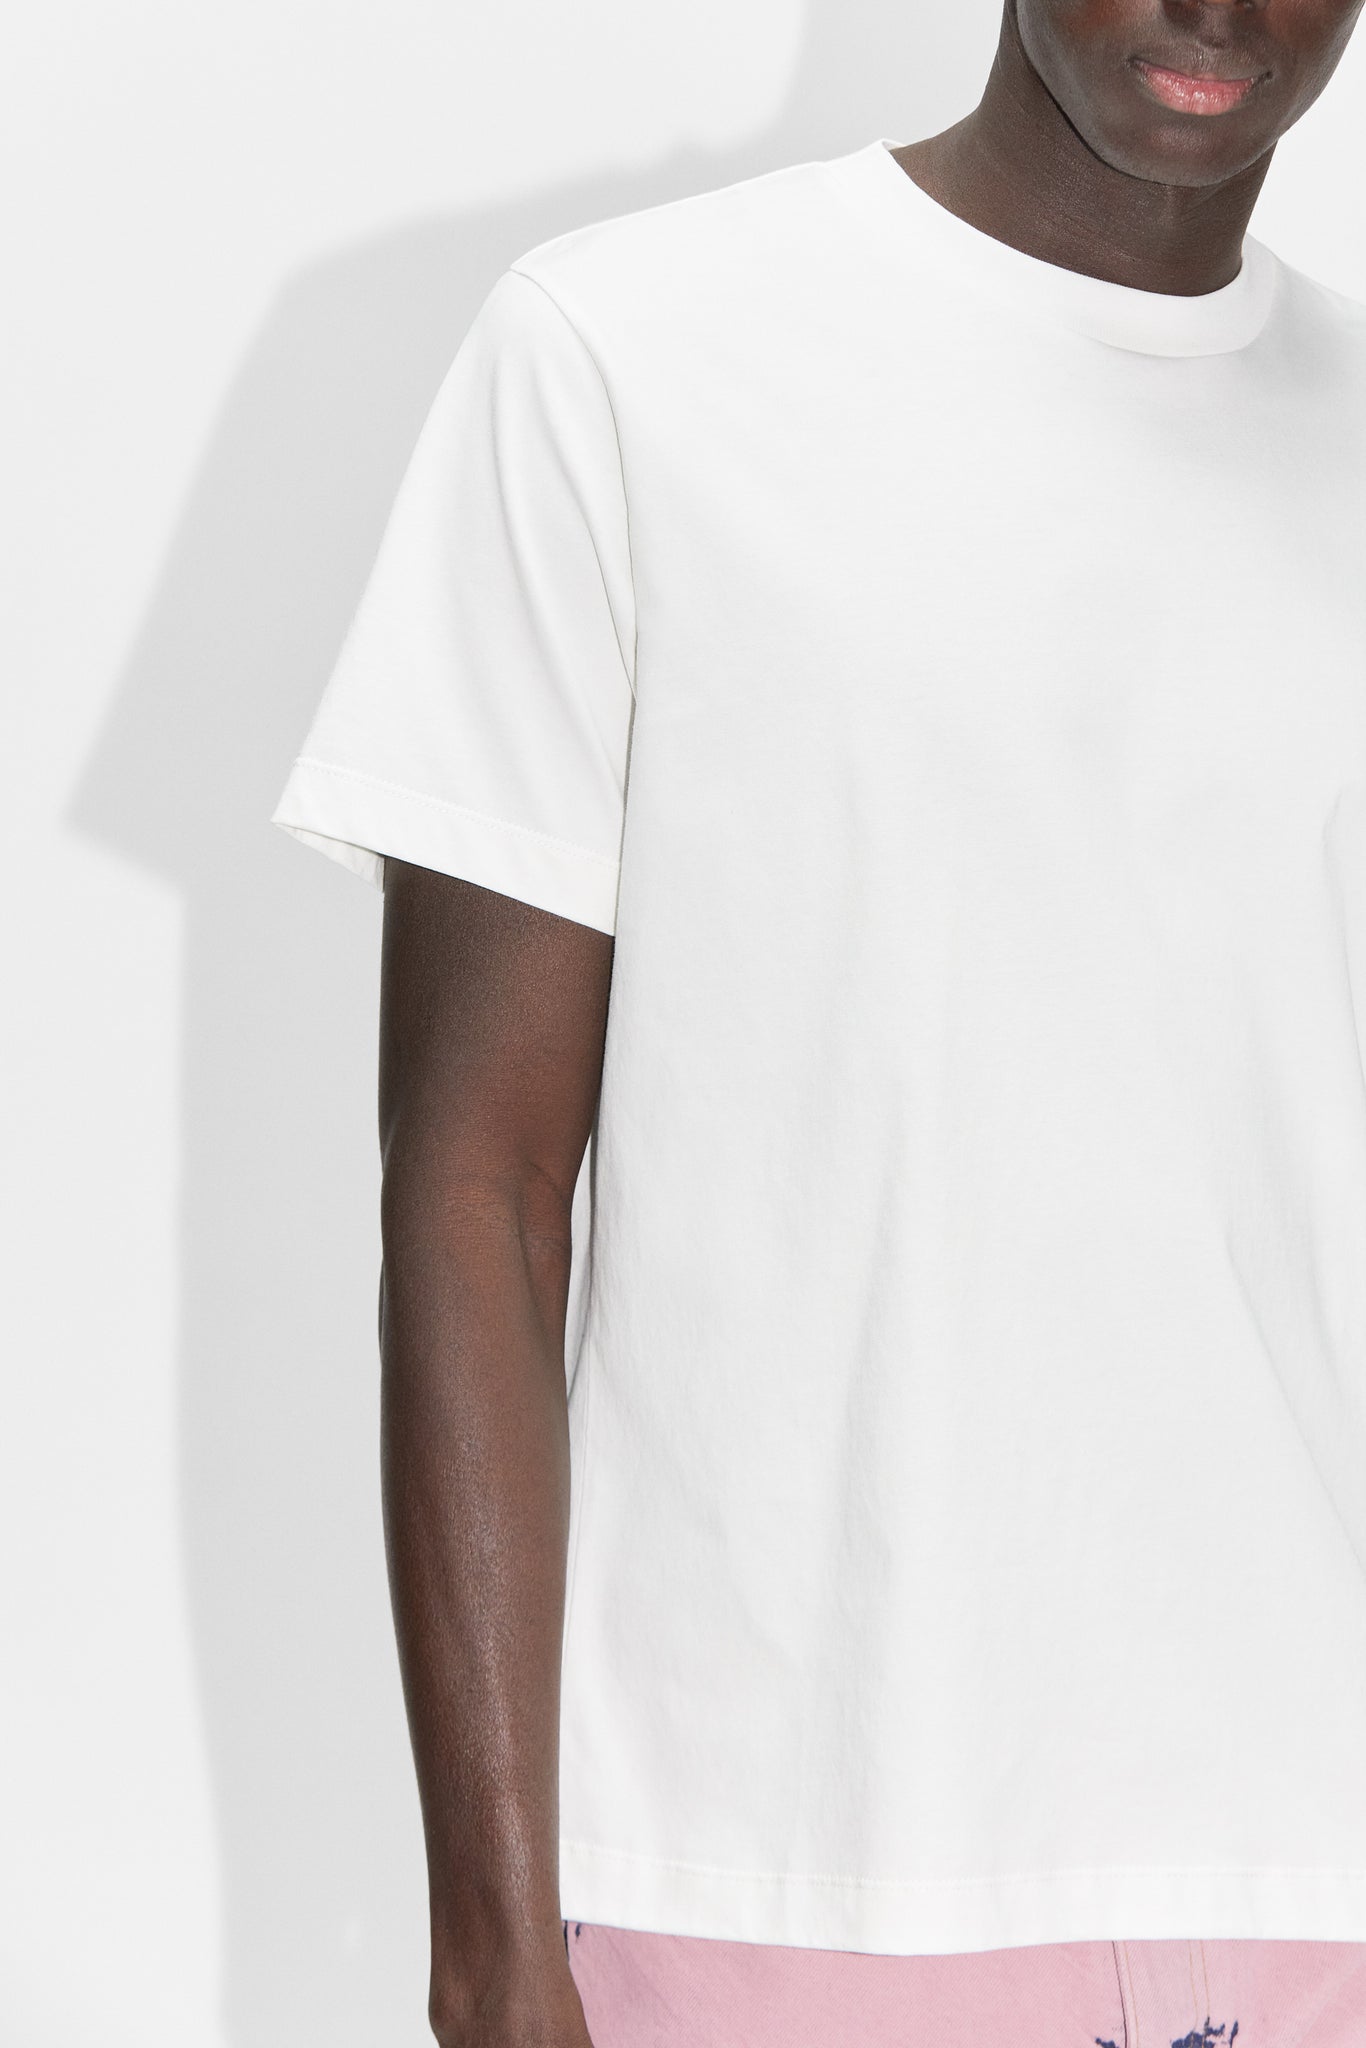 STHLM Faded Black Off in & Relaxed T-shirt White Neck HOPE Crew –